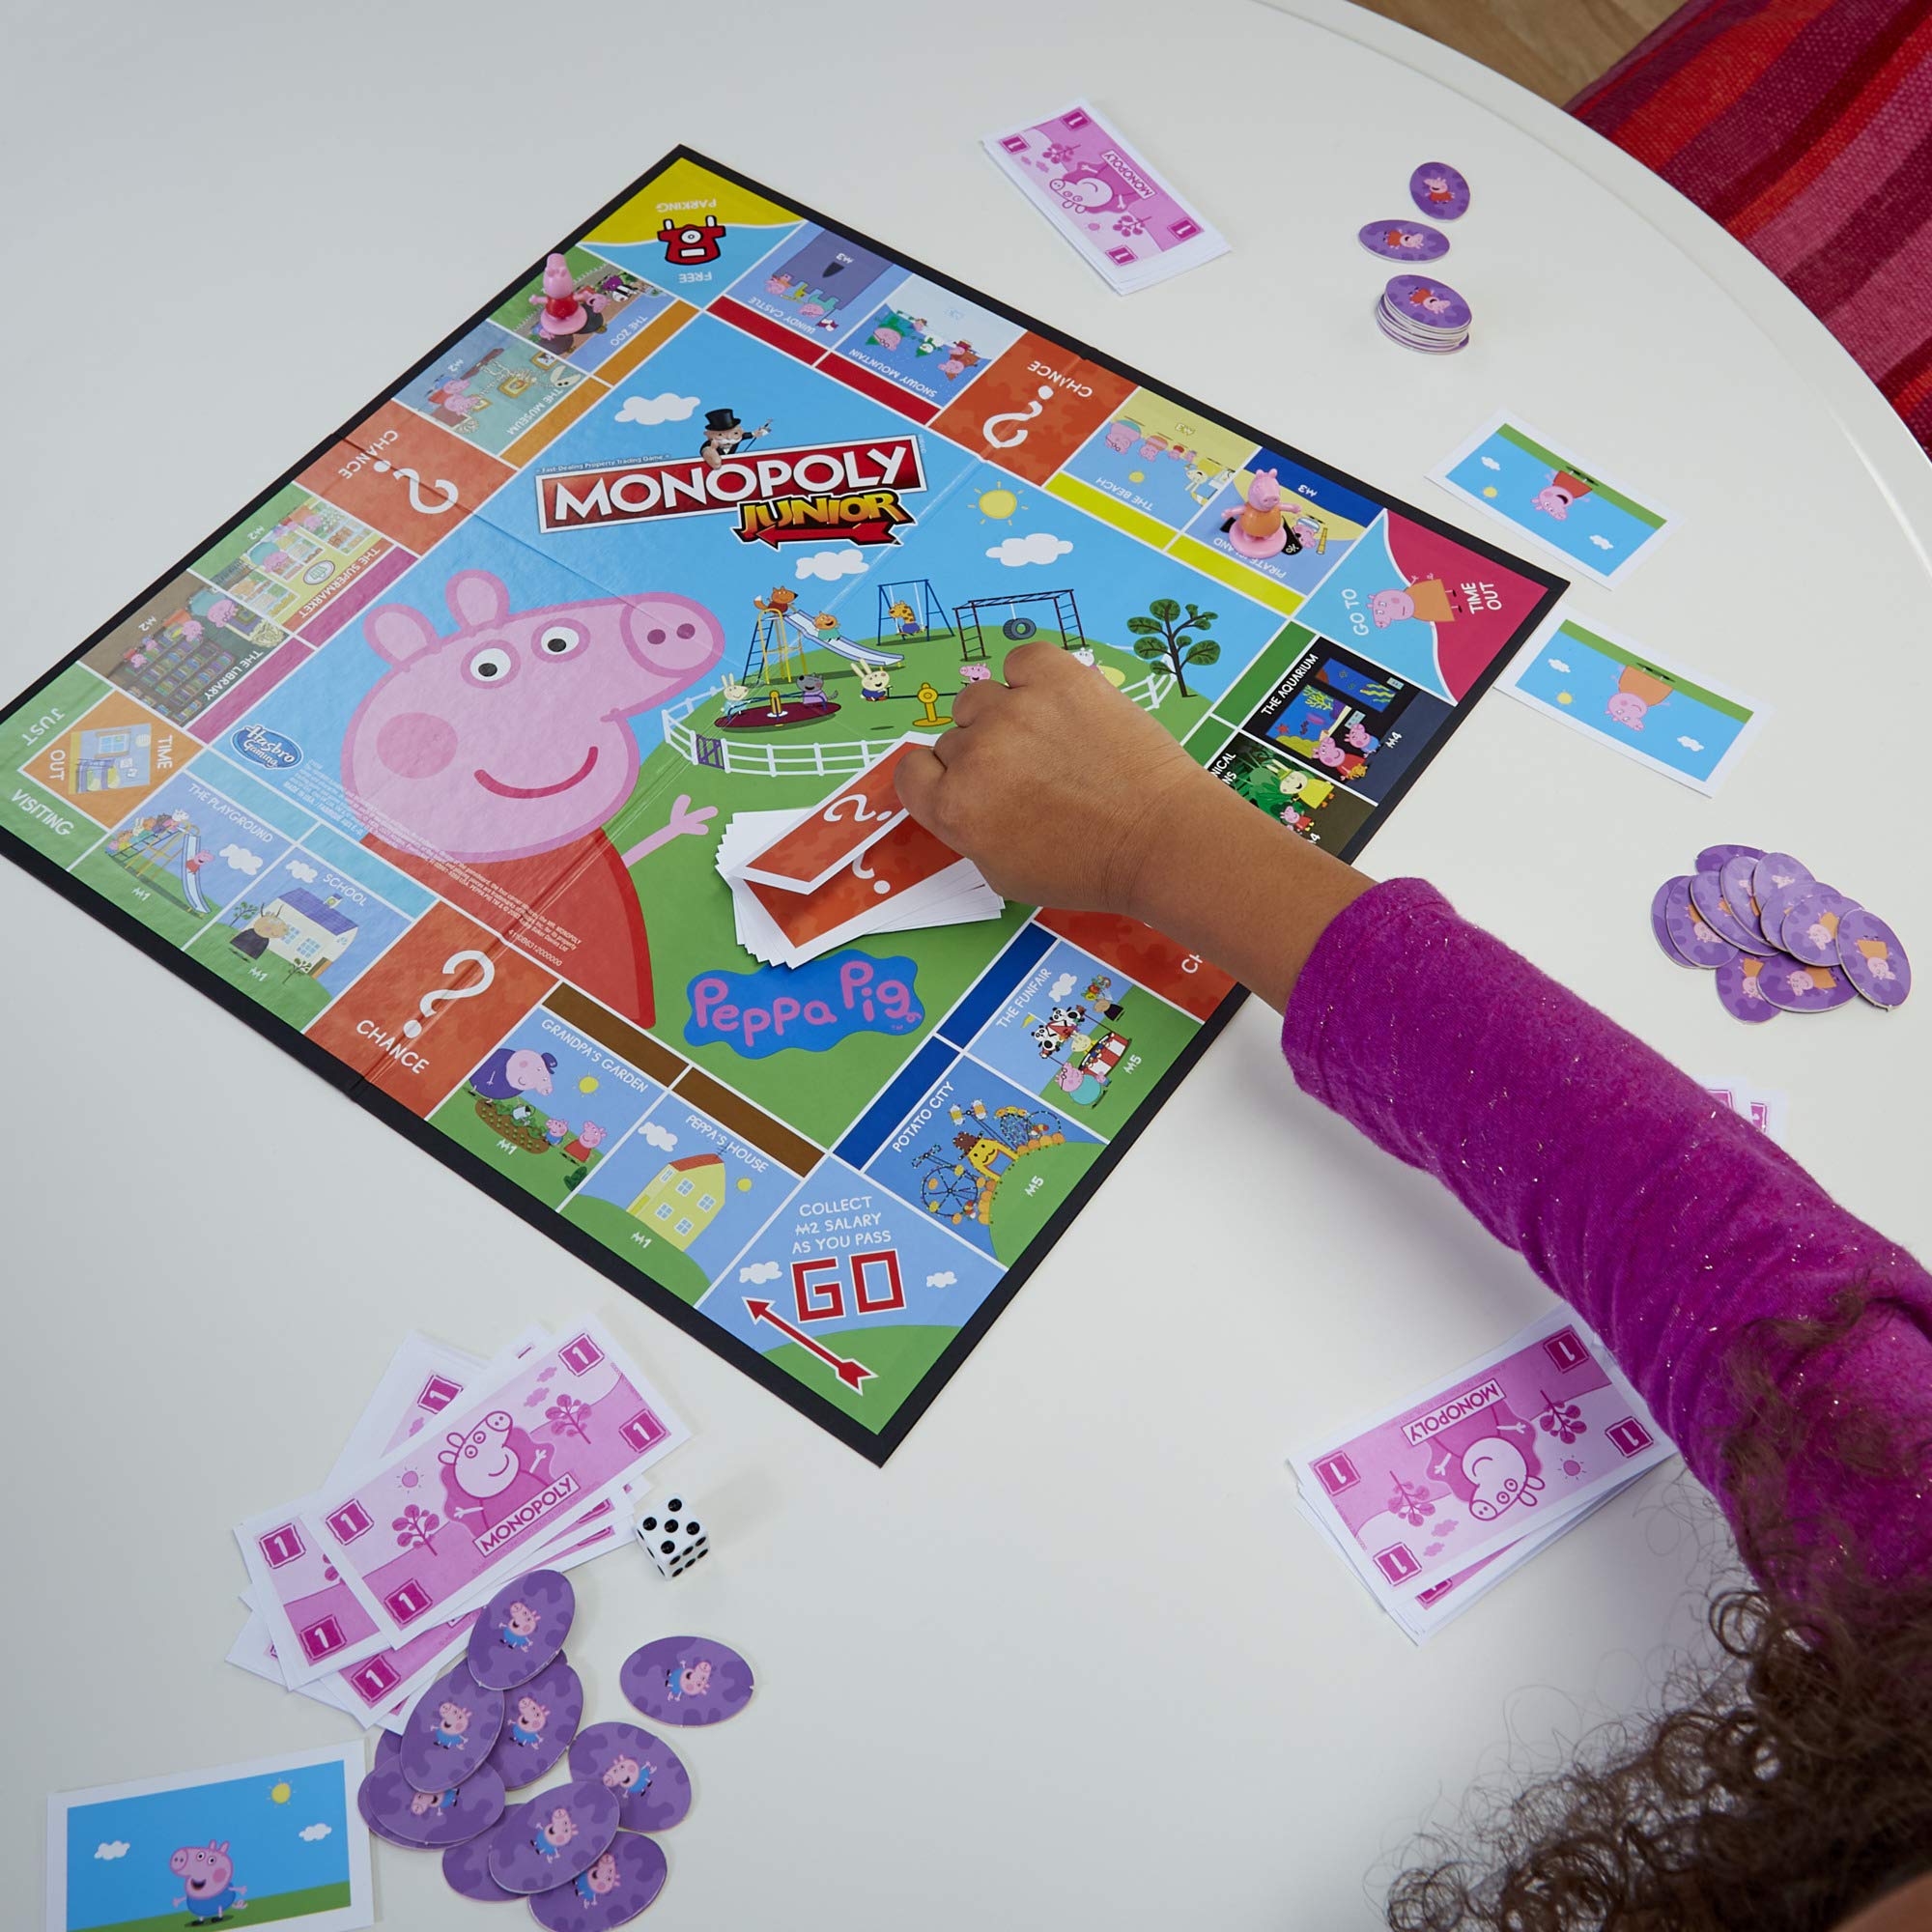 Monopoly Junior: Peppa Pig Edition Board Game for 2-4 Players, Indoor Games for Kids, Peppa Pig Toys and Games, Ages 5+ (Amazon Exclusive)